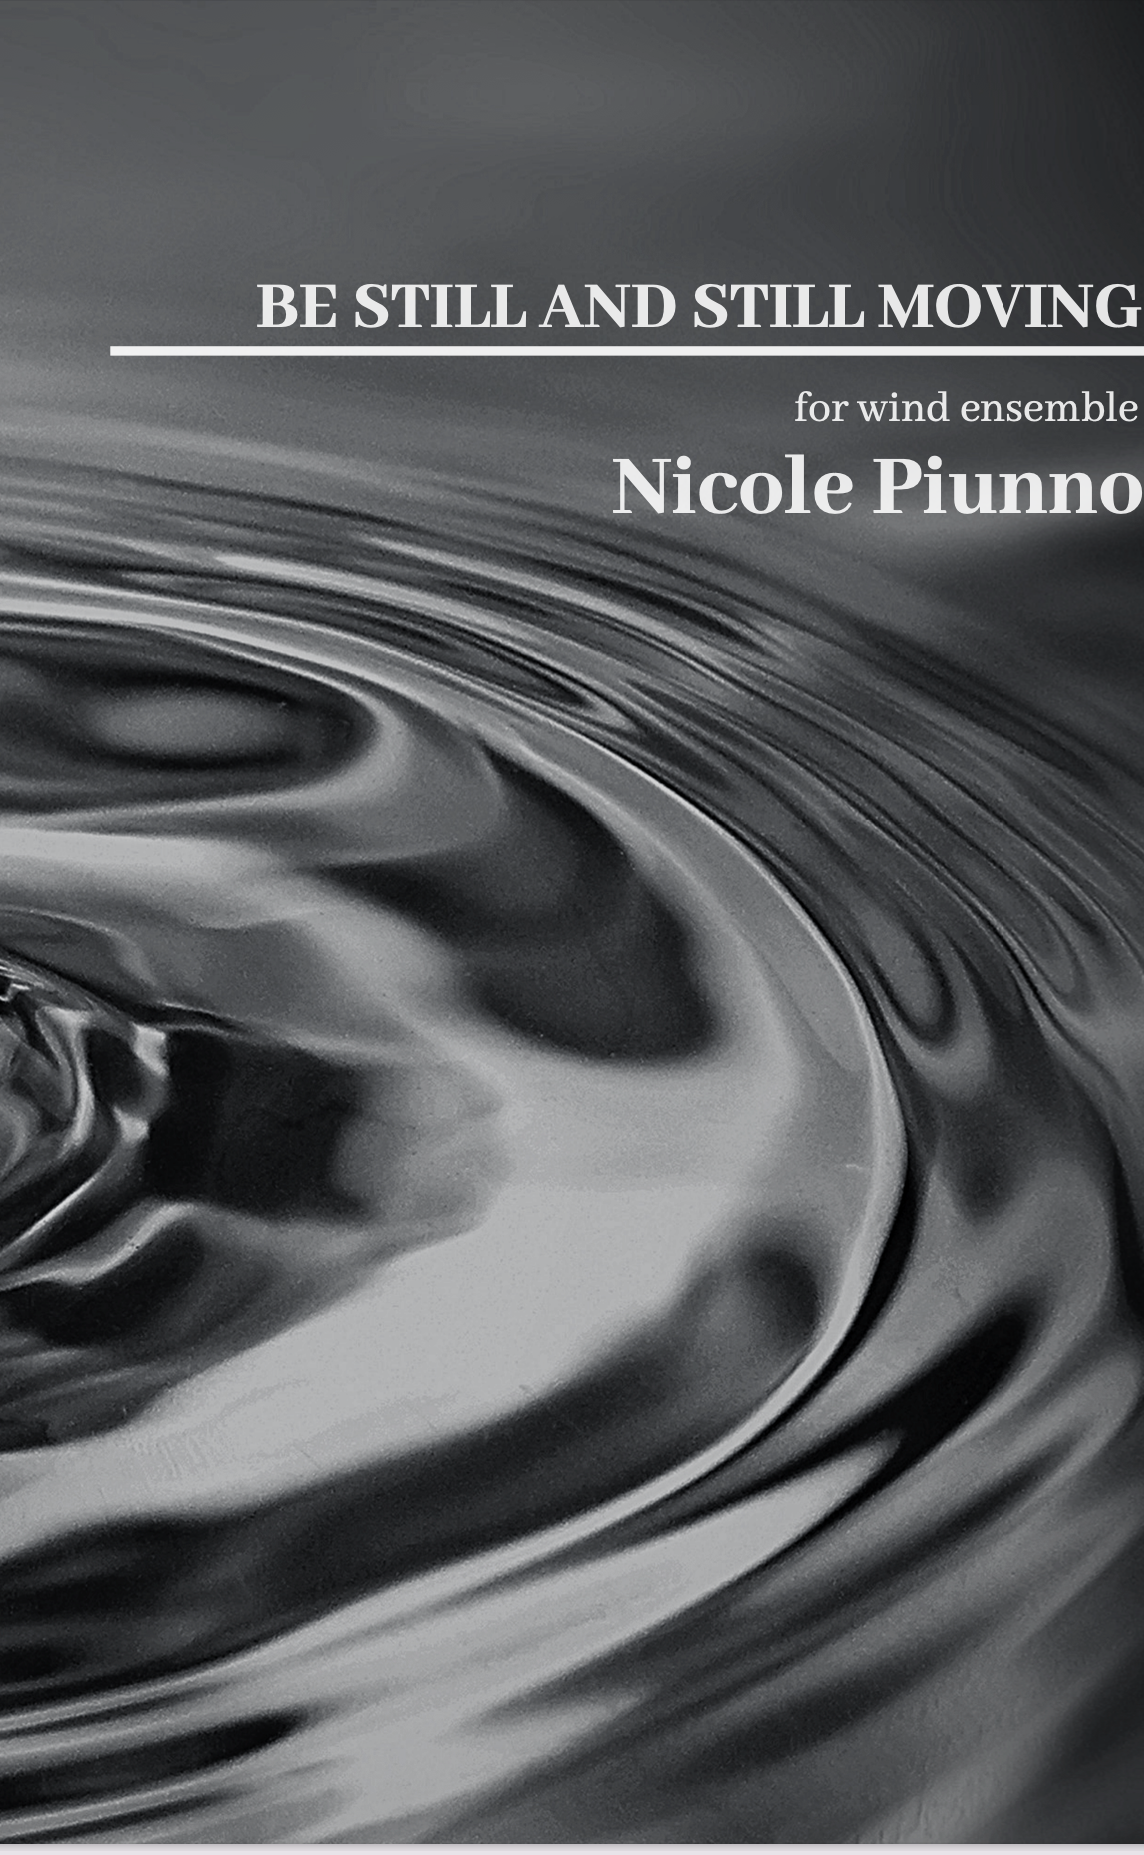 Be Still And Still Moving (Score Only) by Nicole Piunno